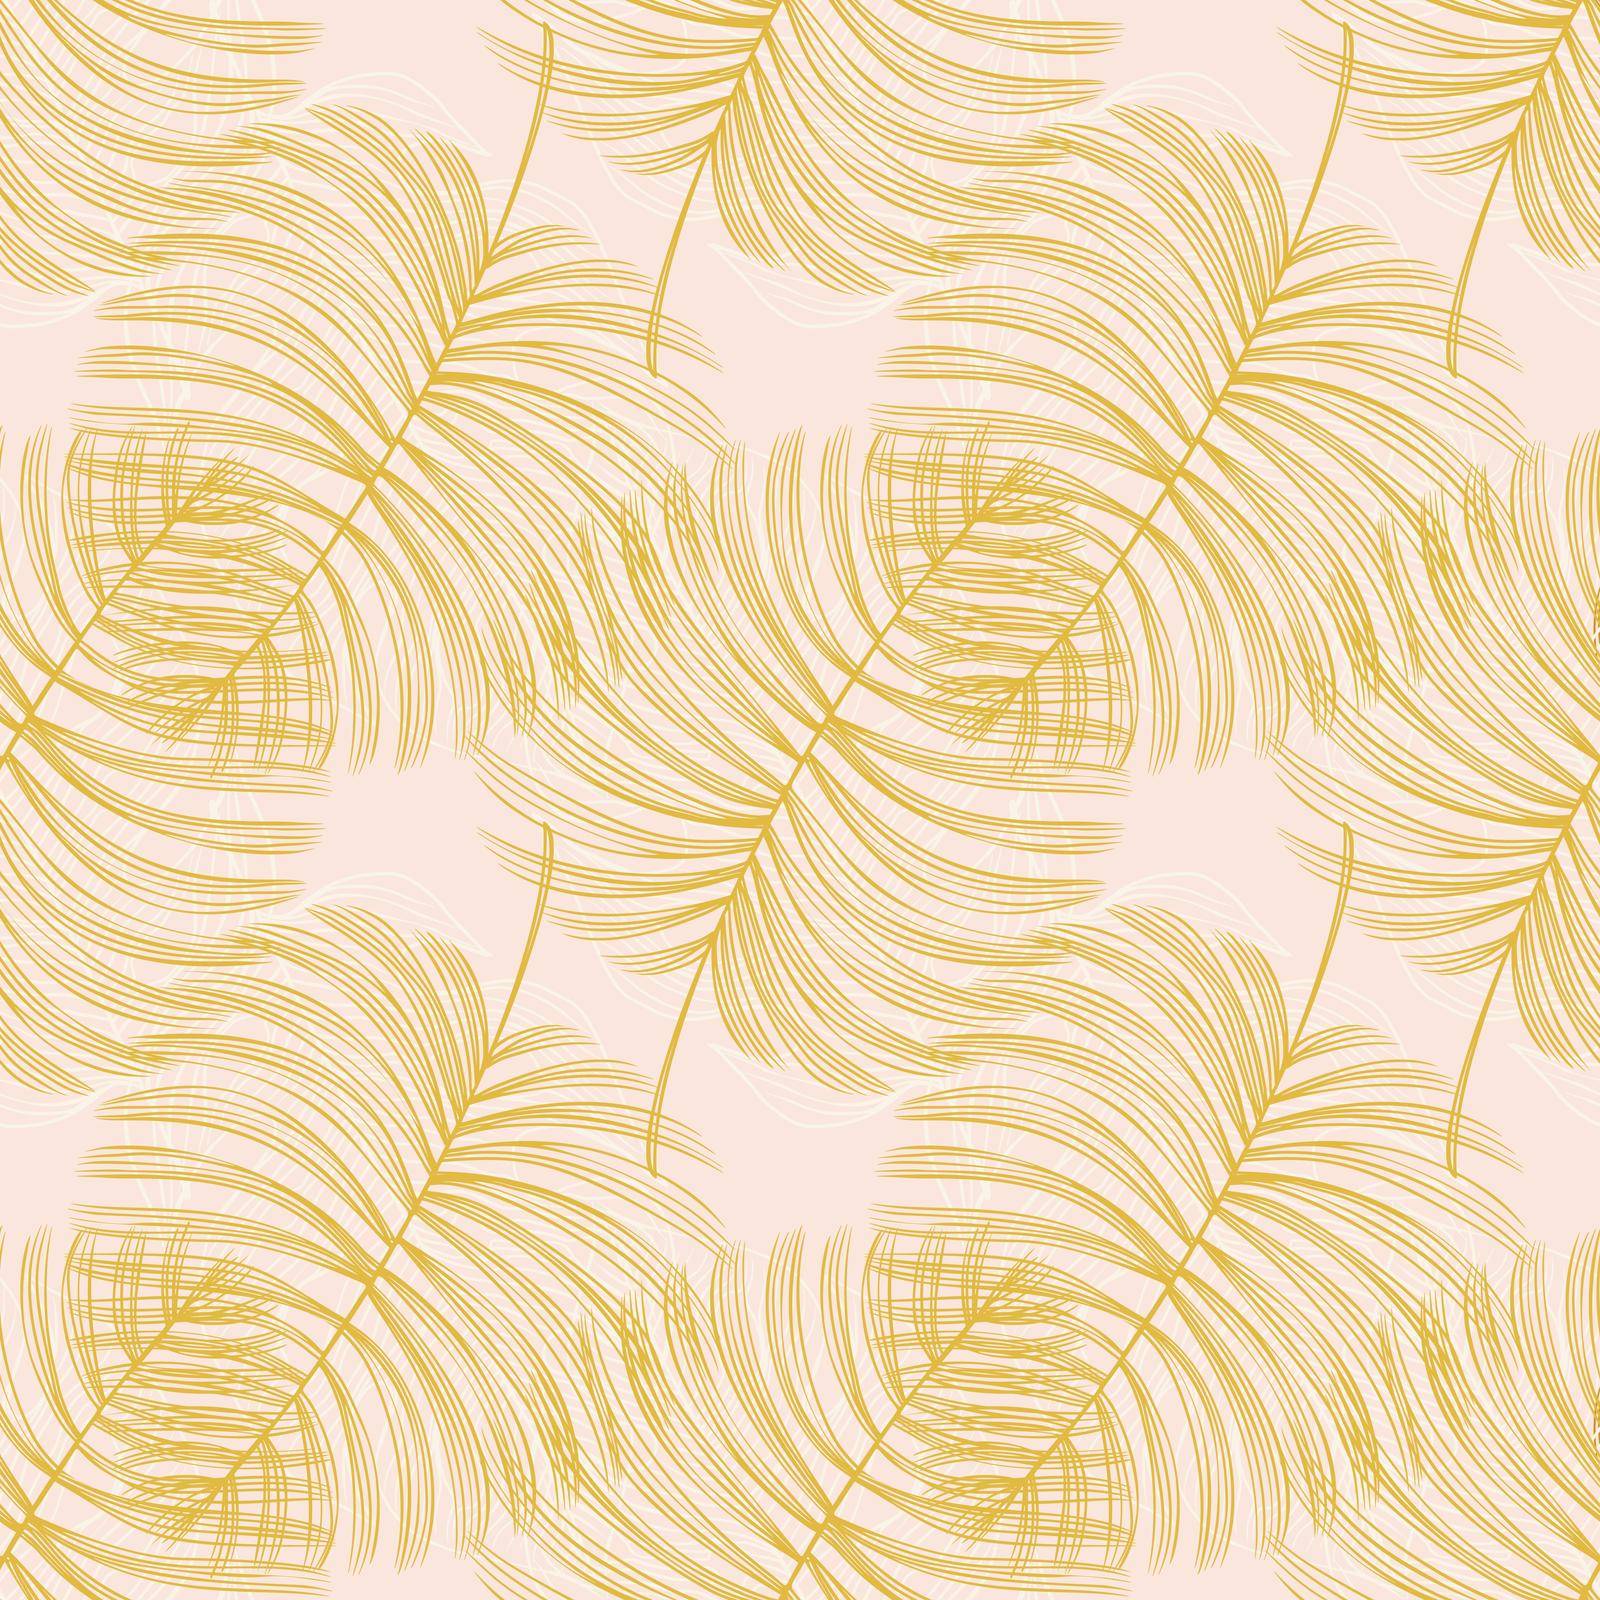 Vector Tropical Leaves Hand drawn Seamless Pattern. Paradise Botanical Textile or Wrapping paper and Wallapaper Surface Design. Vector illustration